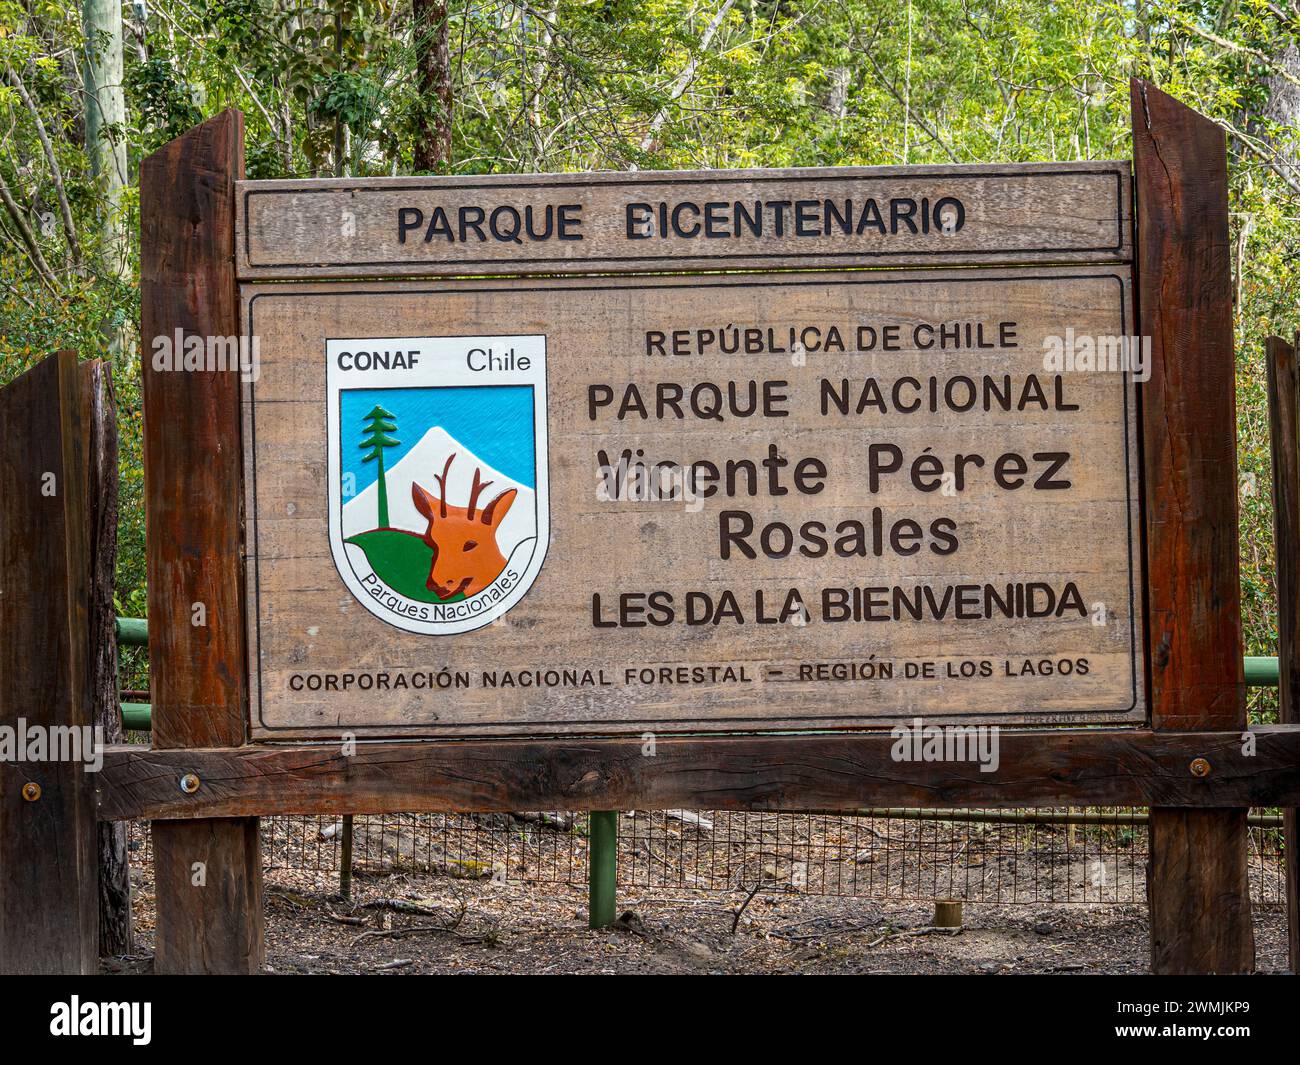 Signpost of National Park Vicente Perez Rosales, Conaf, Chile Stock Photo